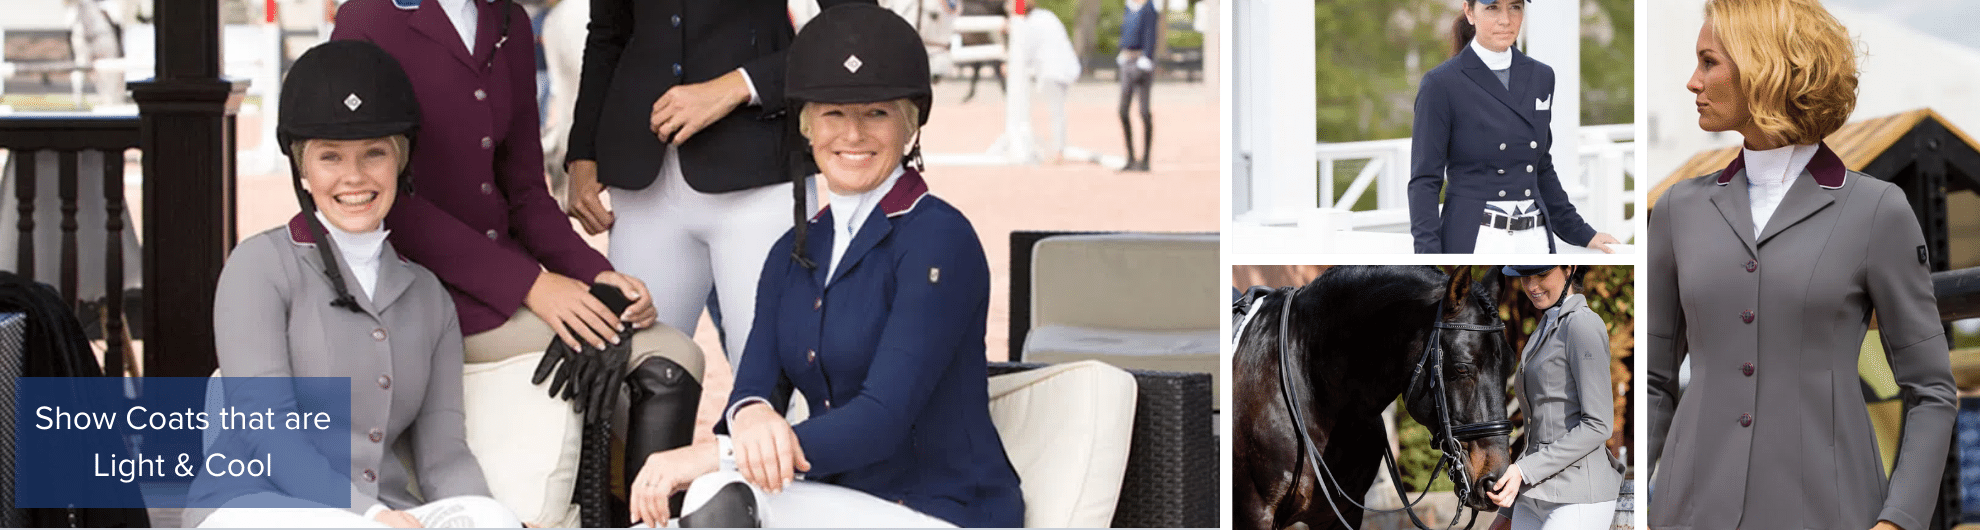 Ride Cool in a New Show Coat